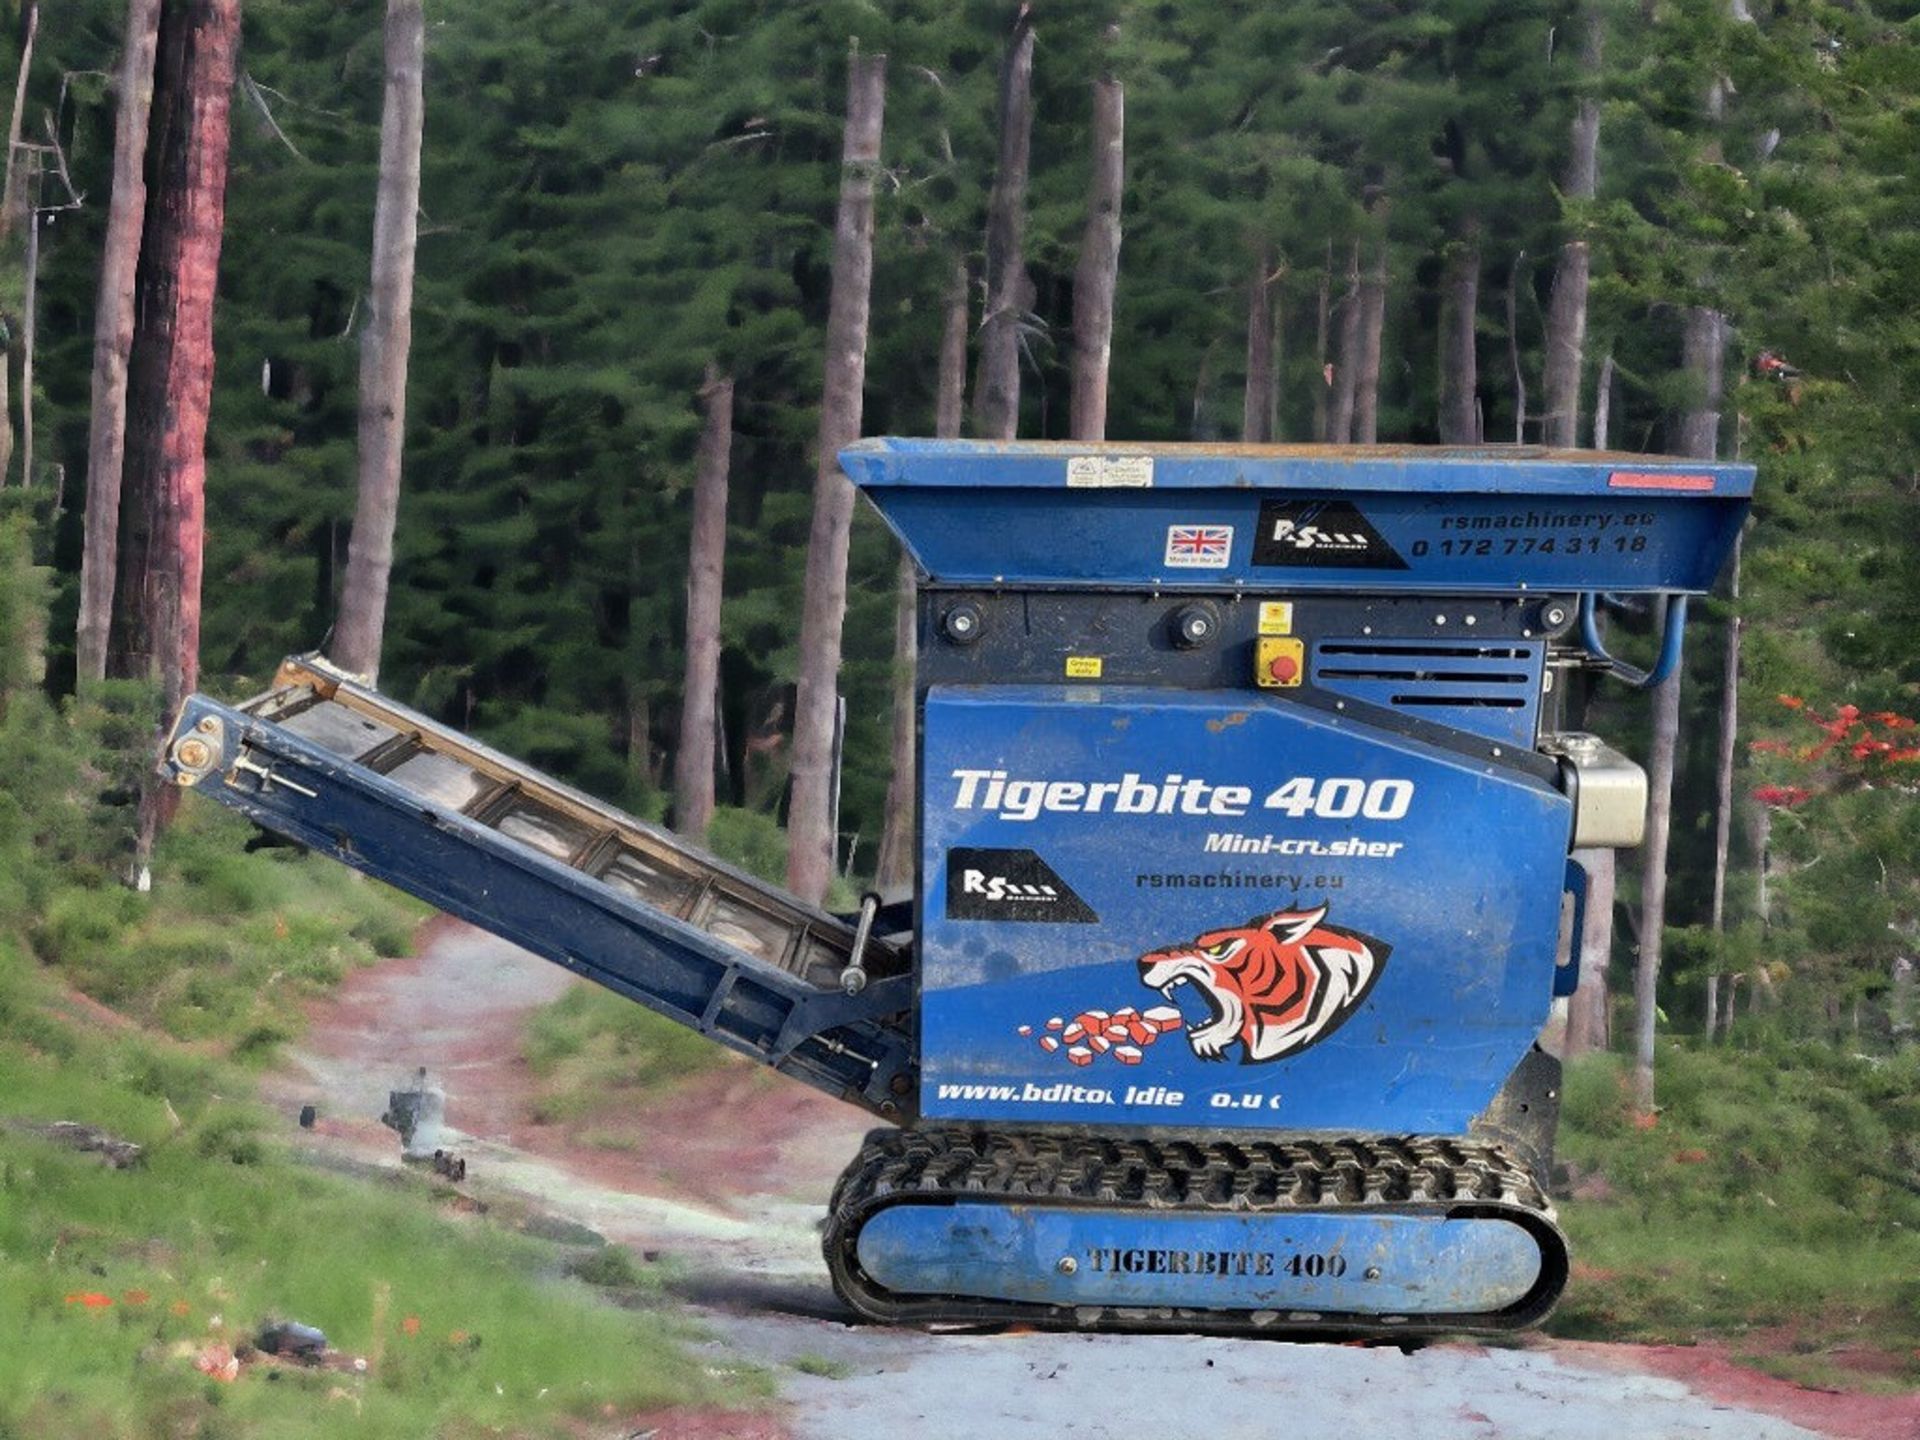 2020 TIGERBITE 400 TRACKED MINI CRUSHER - EFFICIENT, COMPACT, AND READY TO WORK - Image 3 of 7